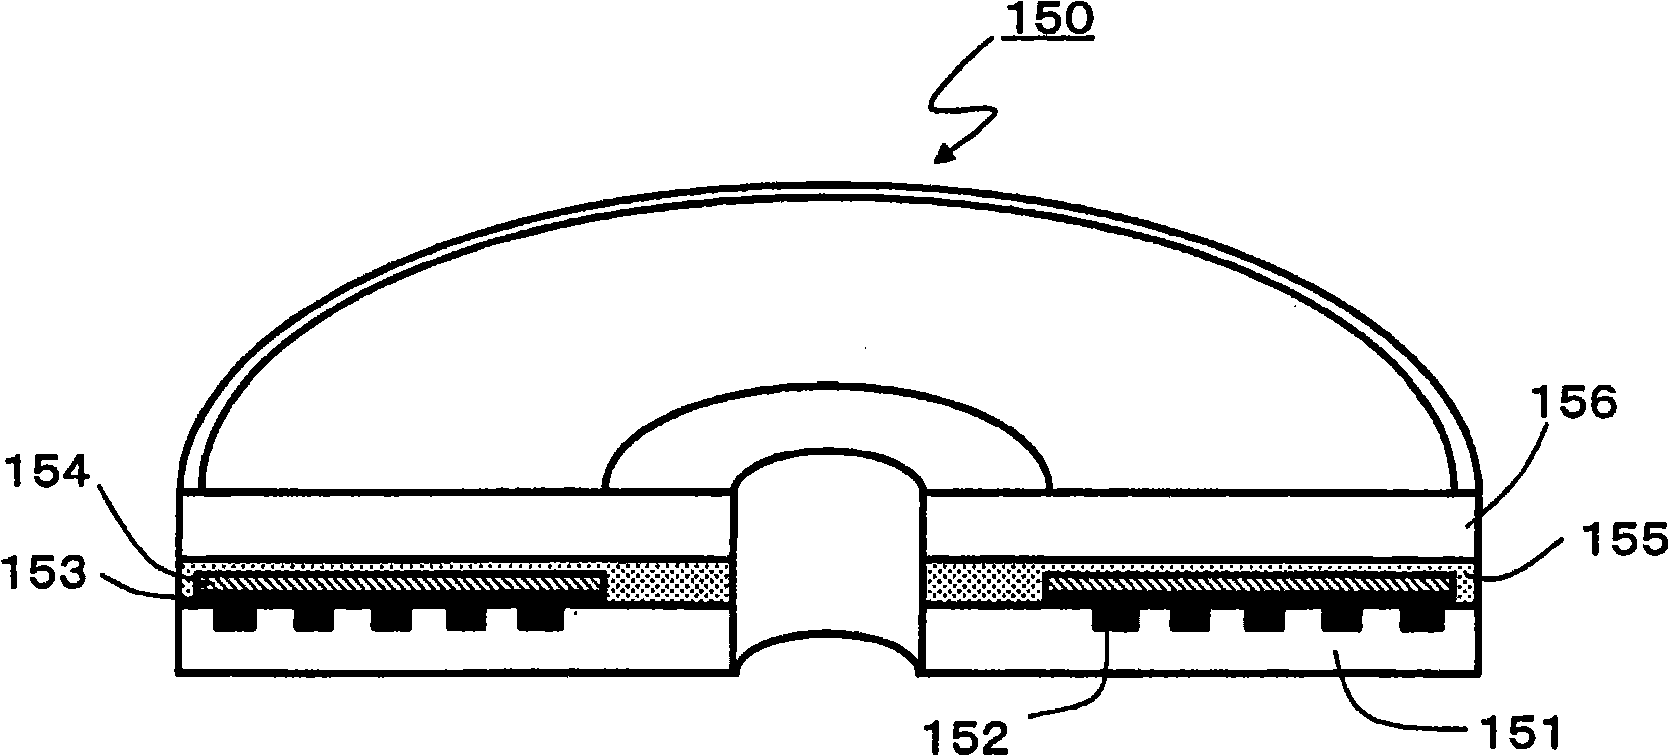 Optical-information reproducing system